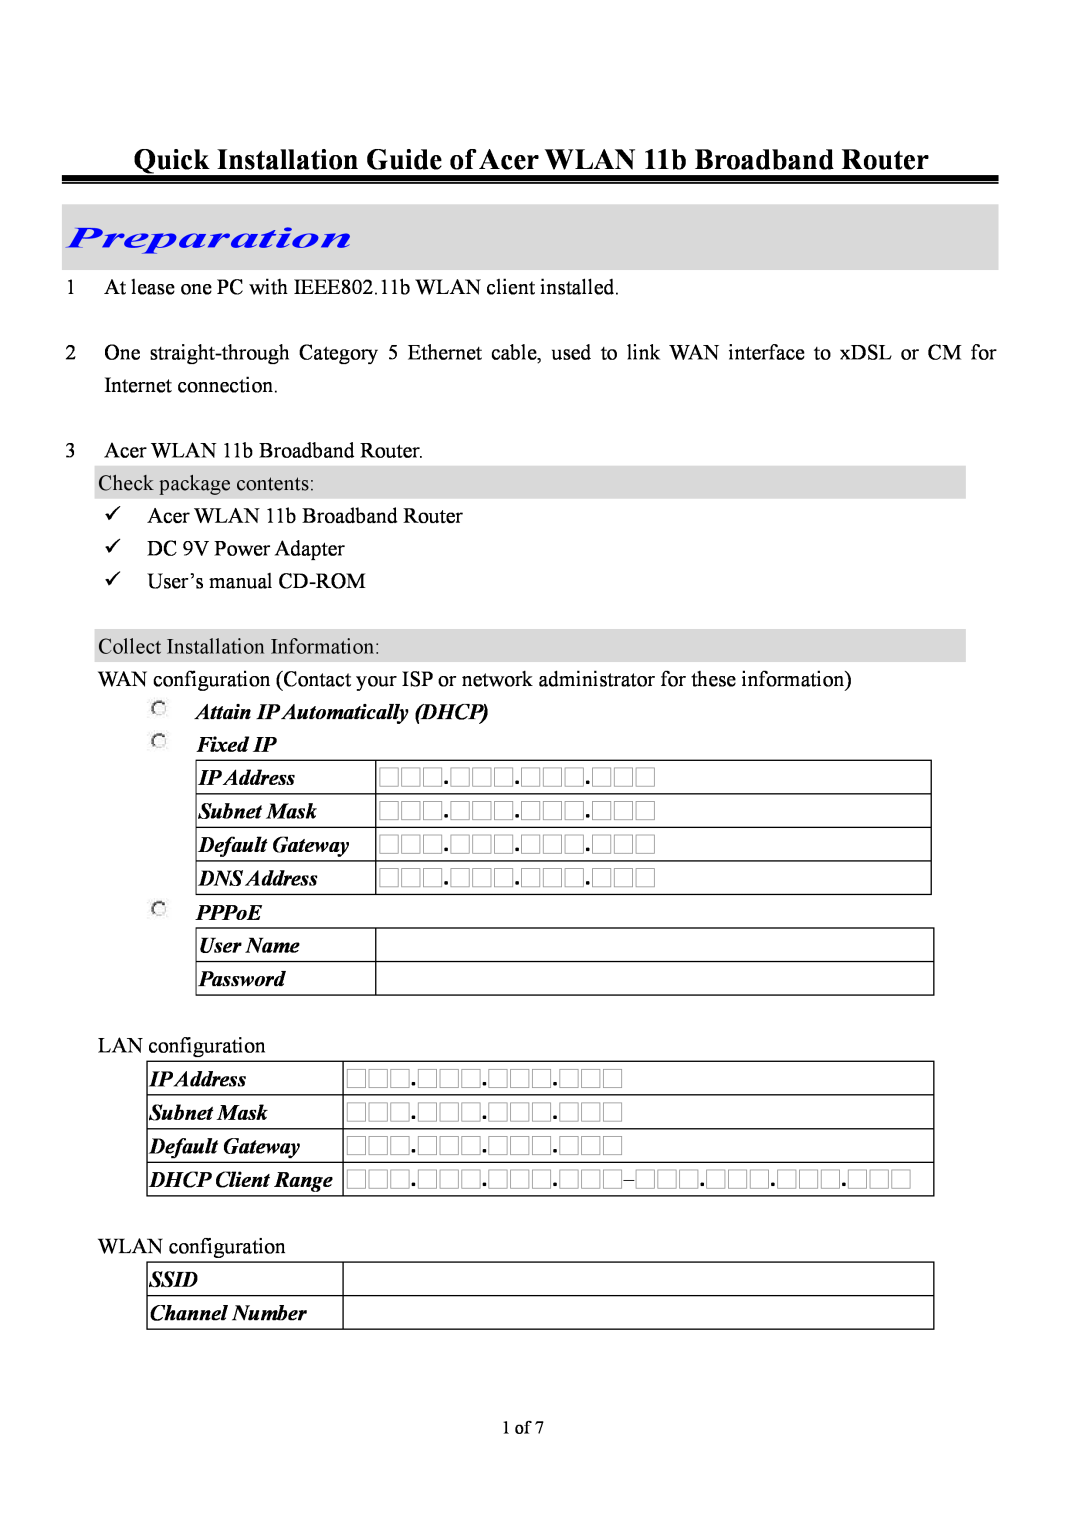 Acer user manual Quick Installation Guide of Acer WLAN 11b Broadband Router, Preparation, IP Address, Subnet Mask, Ssid 